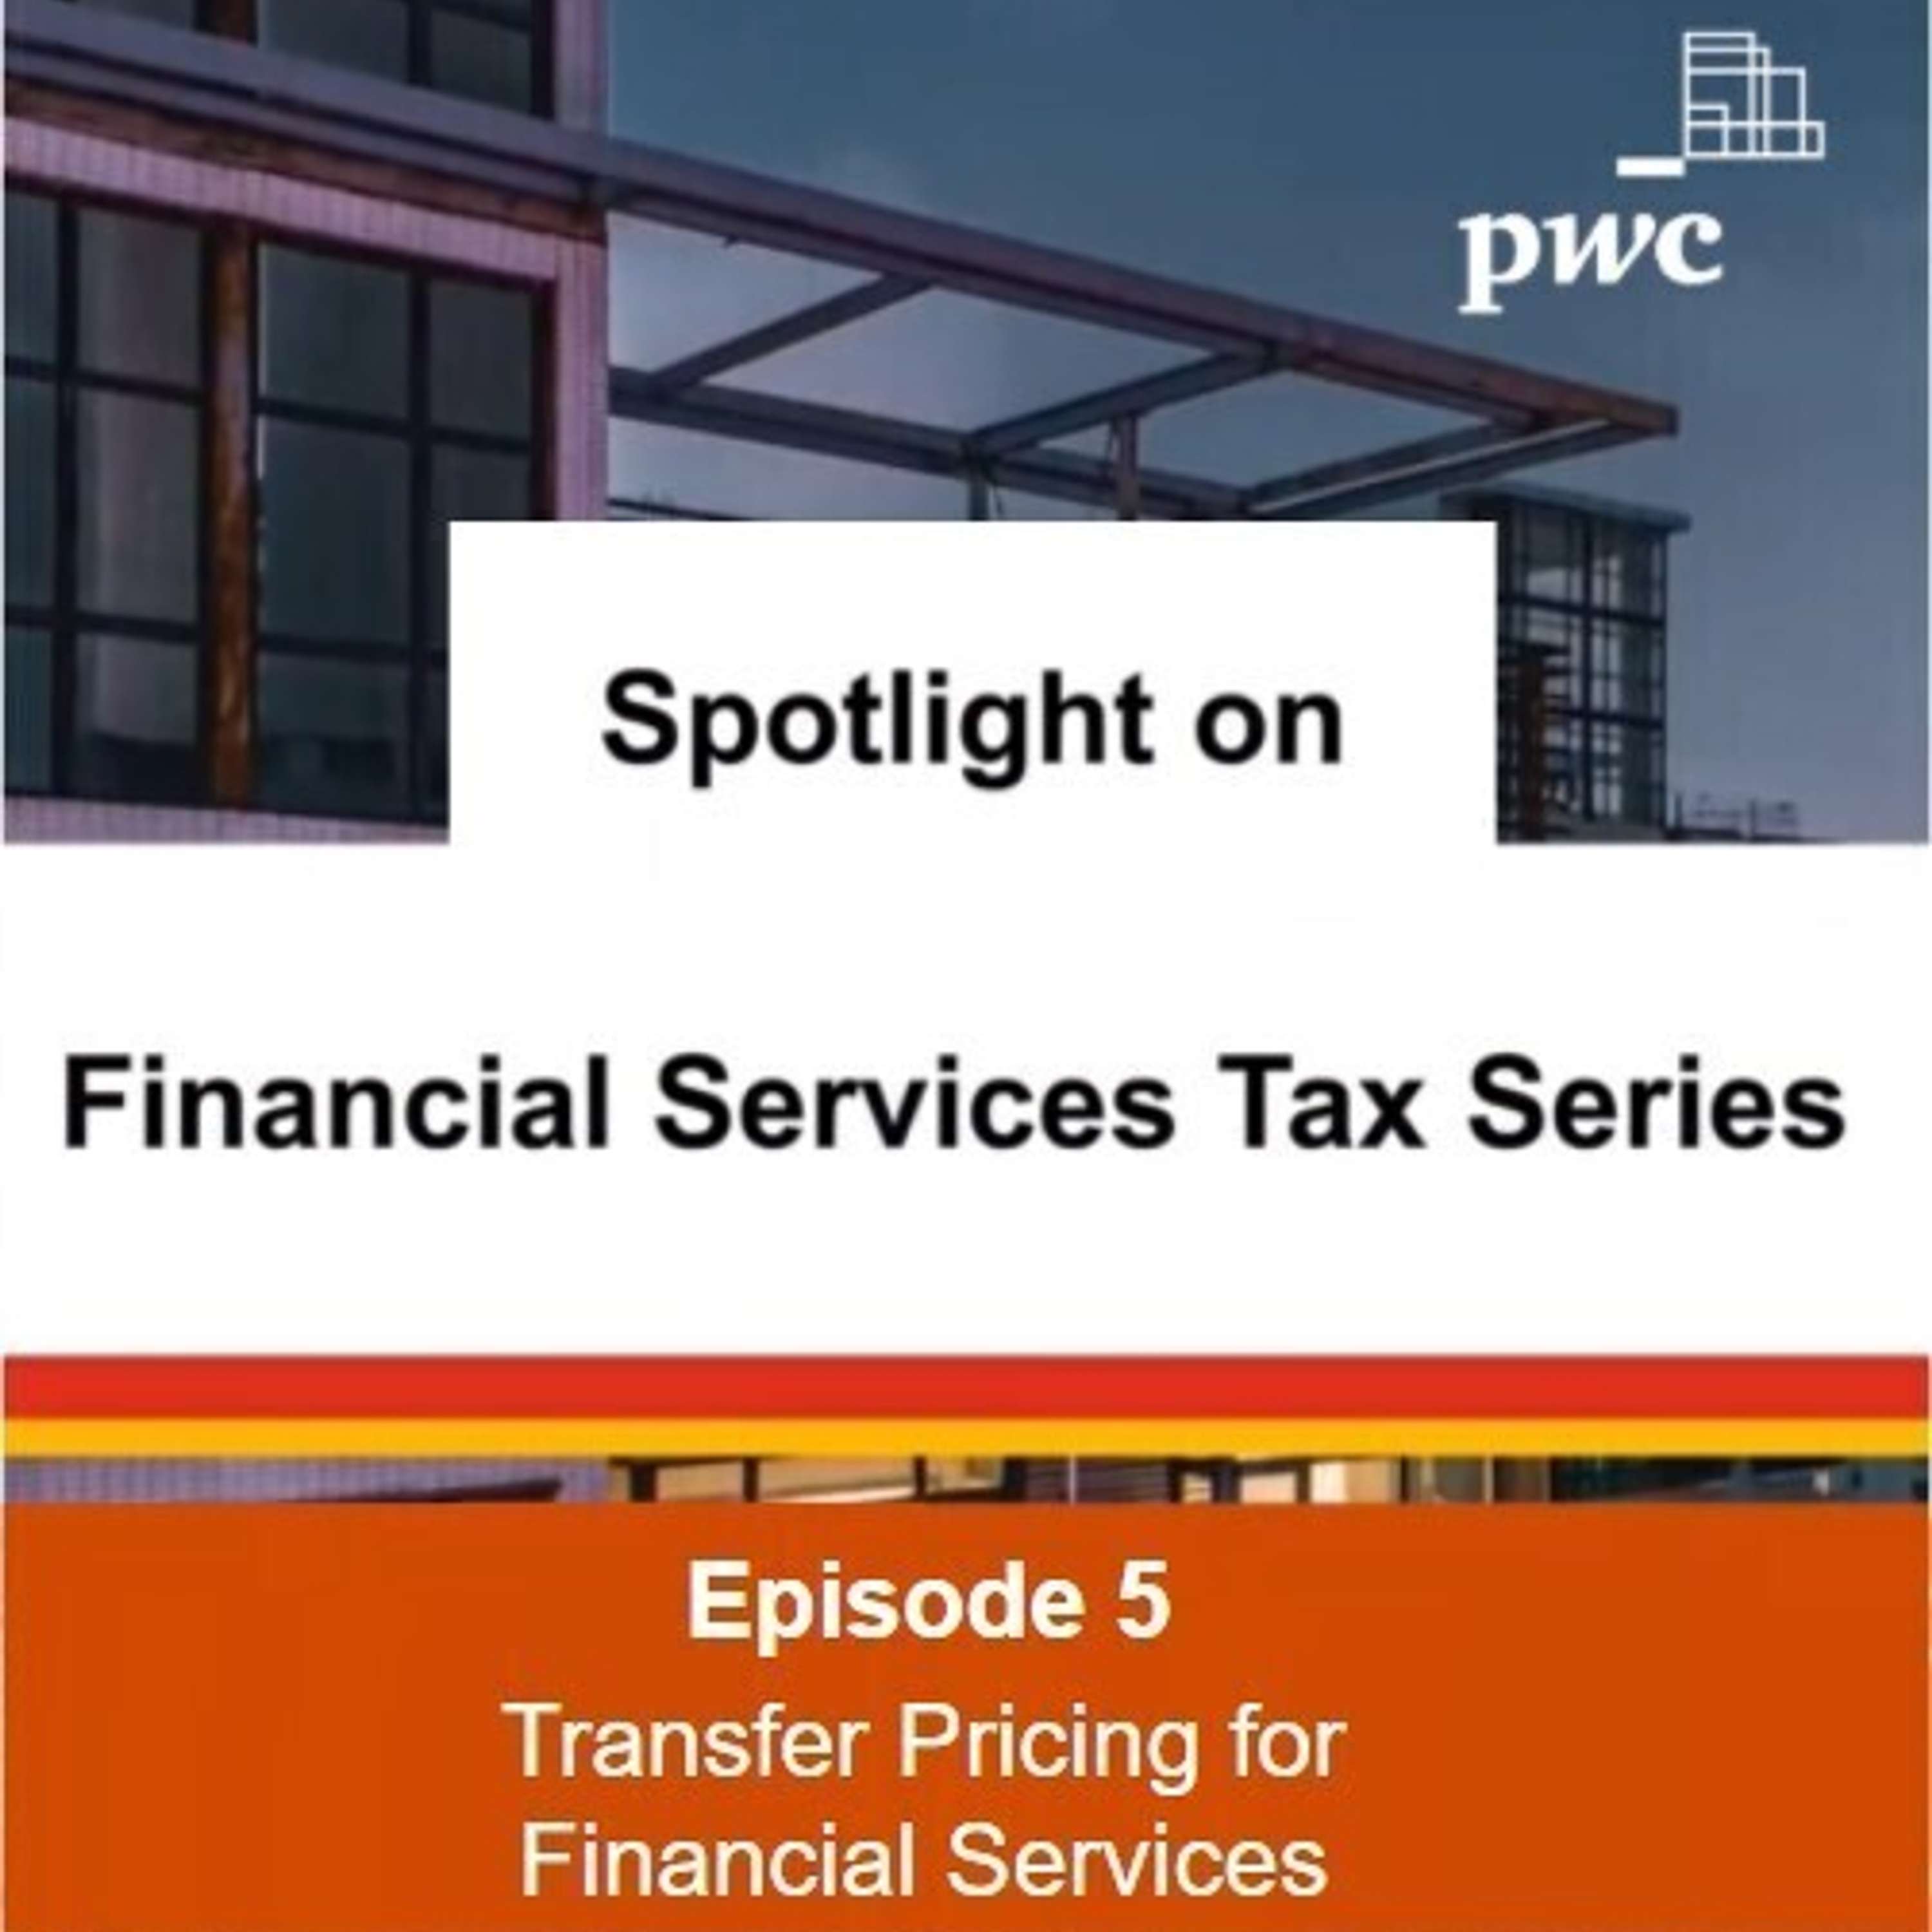 Series 1 - Episode 6: Transfer Pricing for Financial Services